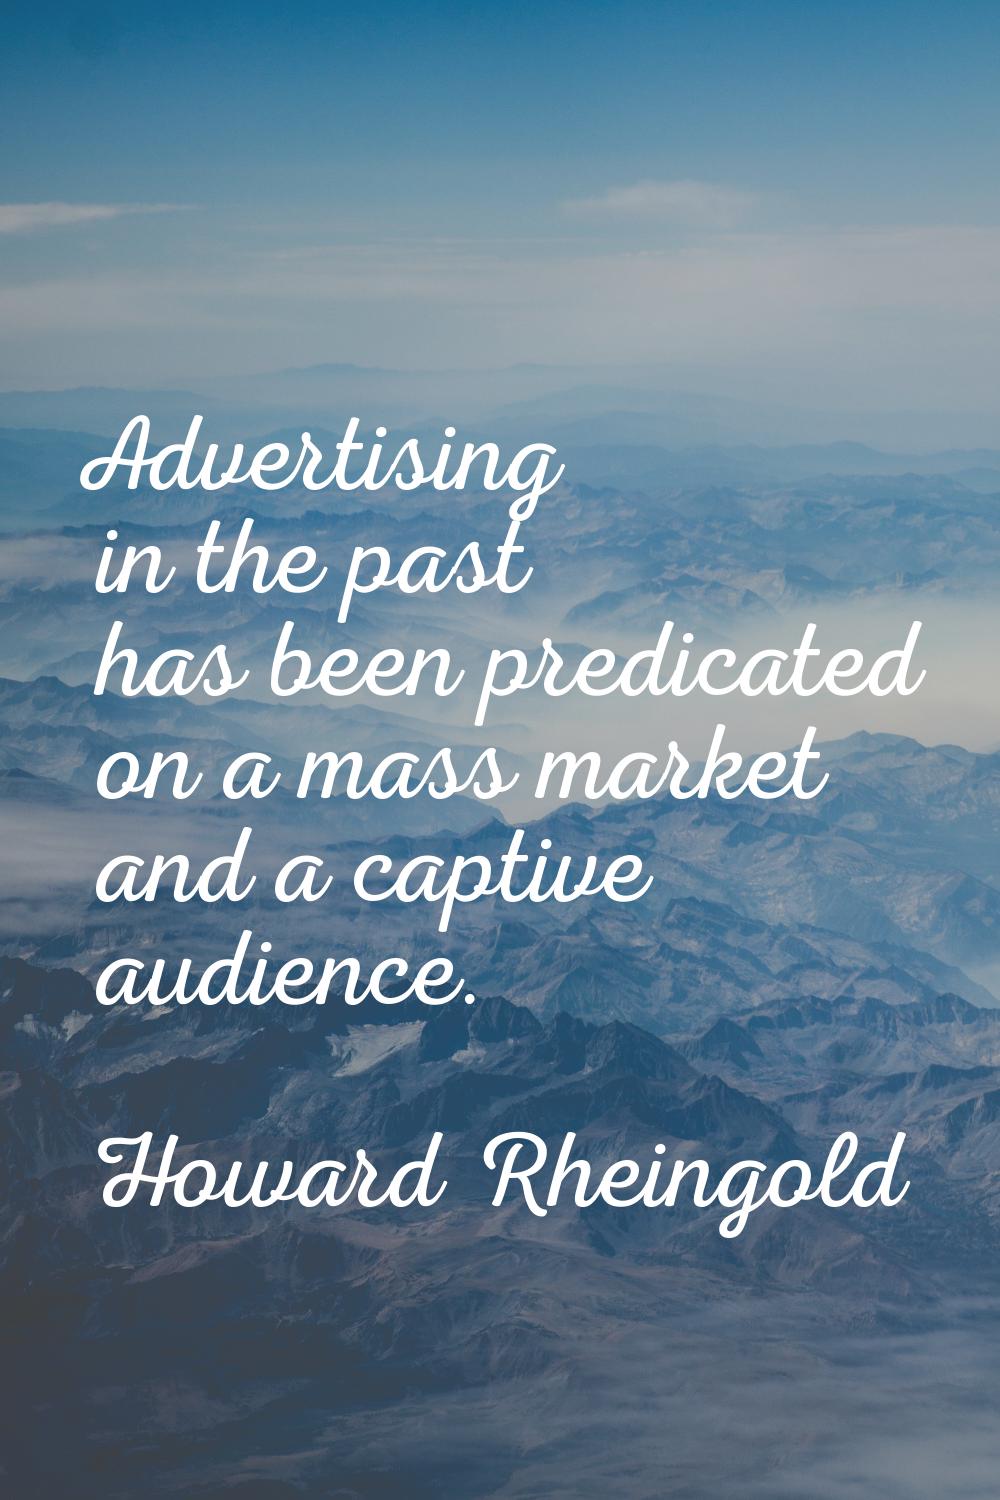 Advertising in the past has been predicated on a mass market and a captive audience.